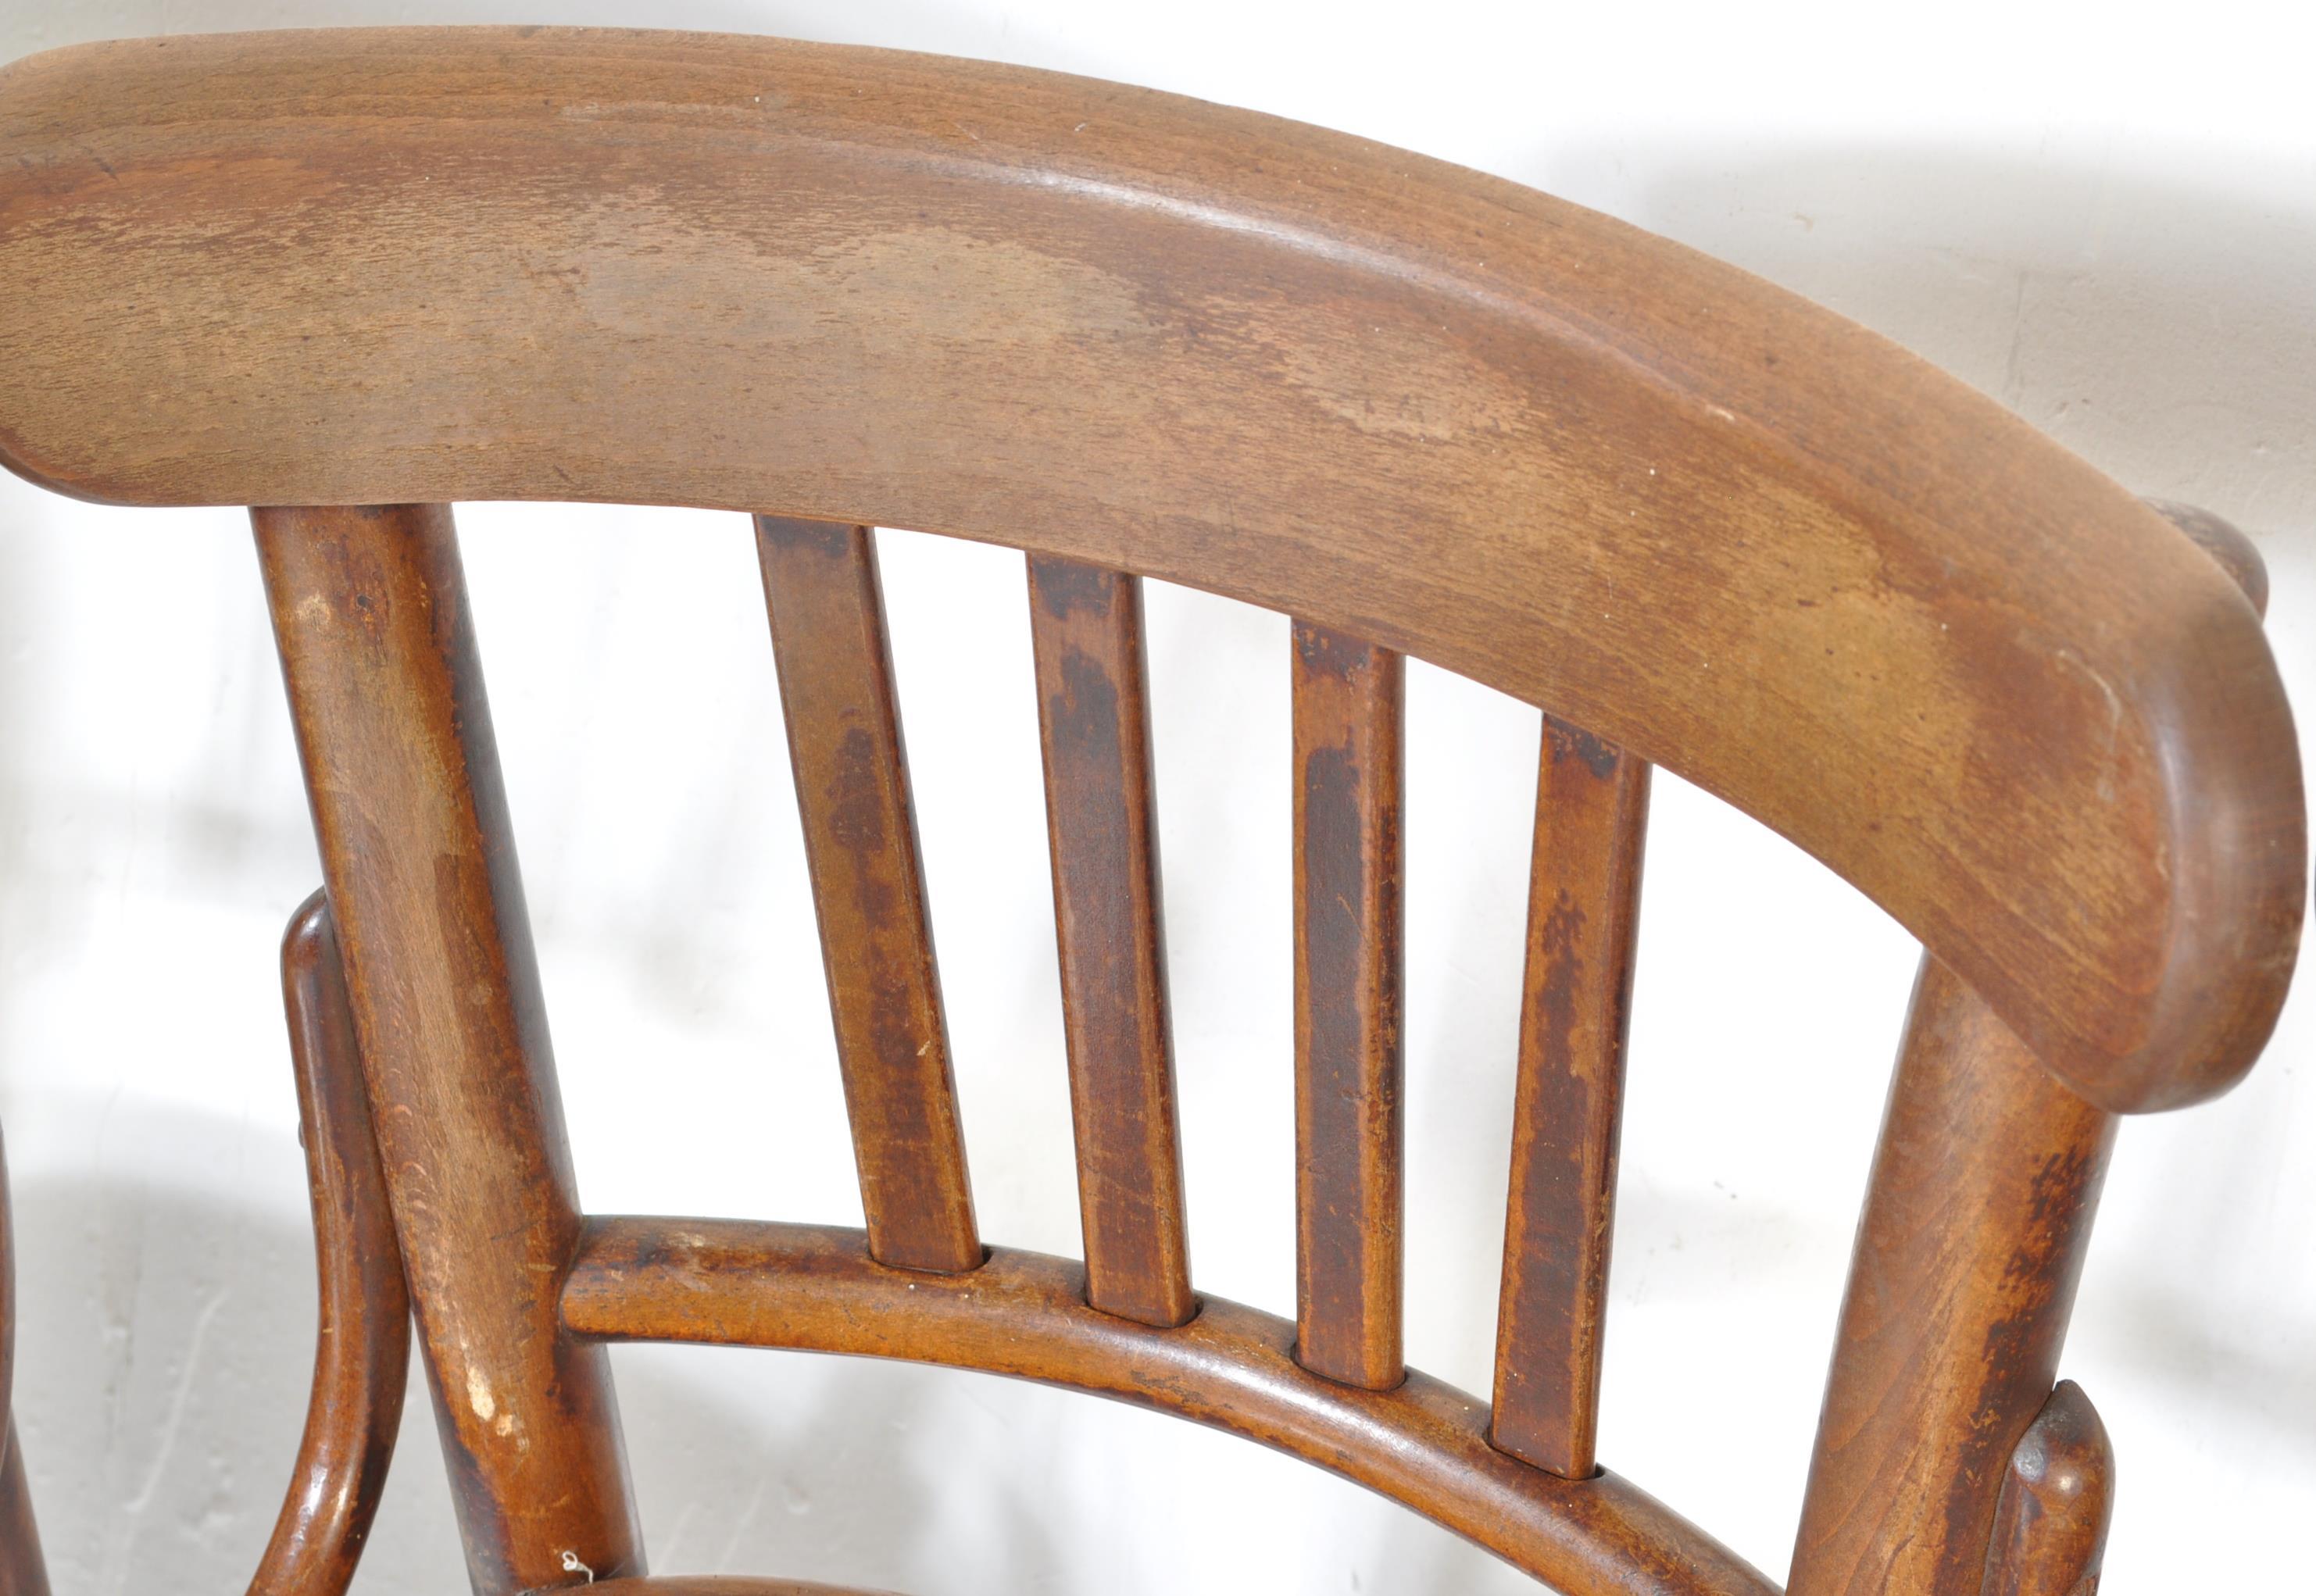 MICHAEL THONET FOR LIGNA - SET OF SIX BENTWOOD BISTRO CHAIRS - Image 4 of 7